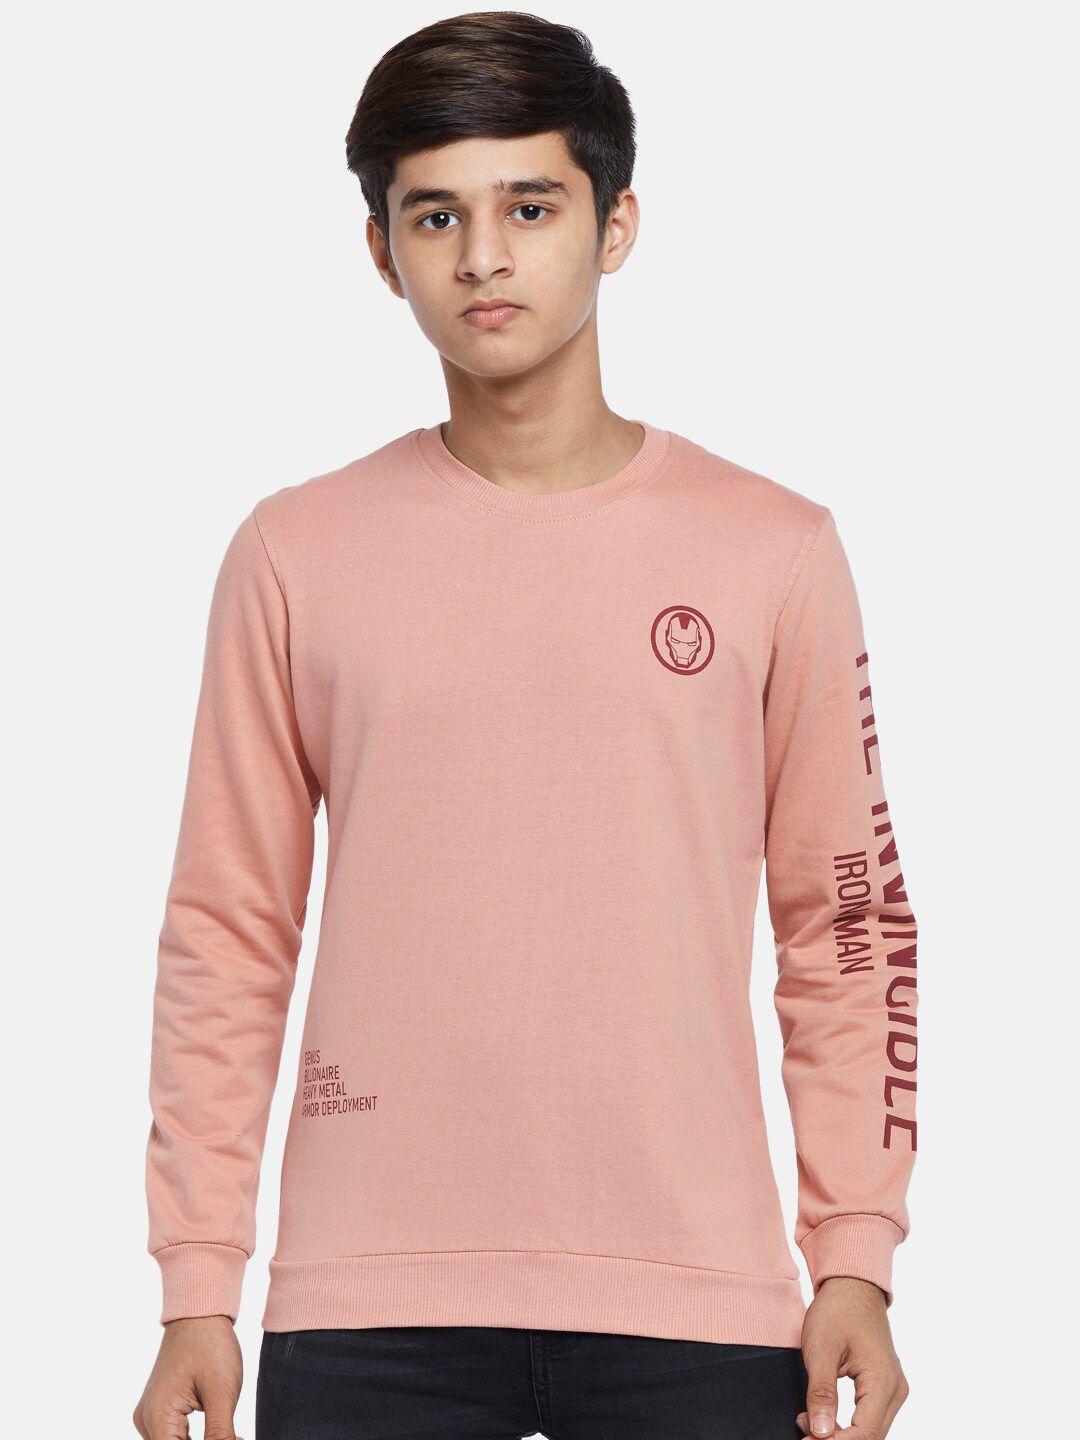 coolsters by pantaloons boys peach cottonsweatshirt